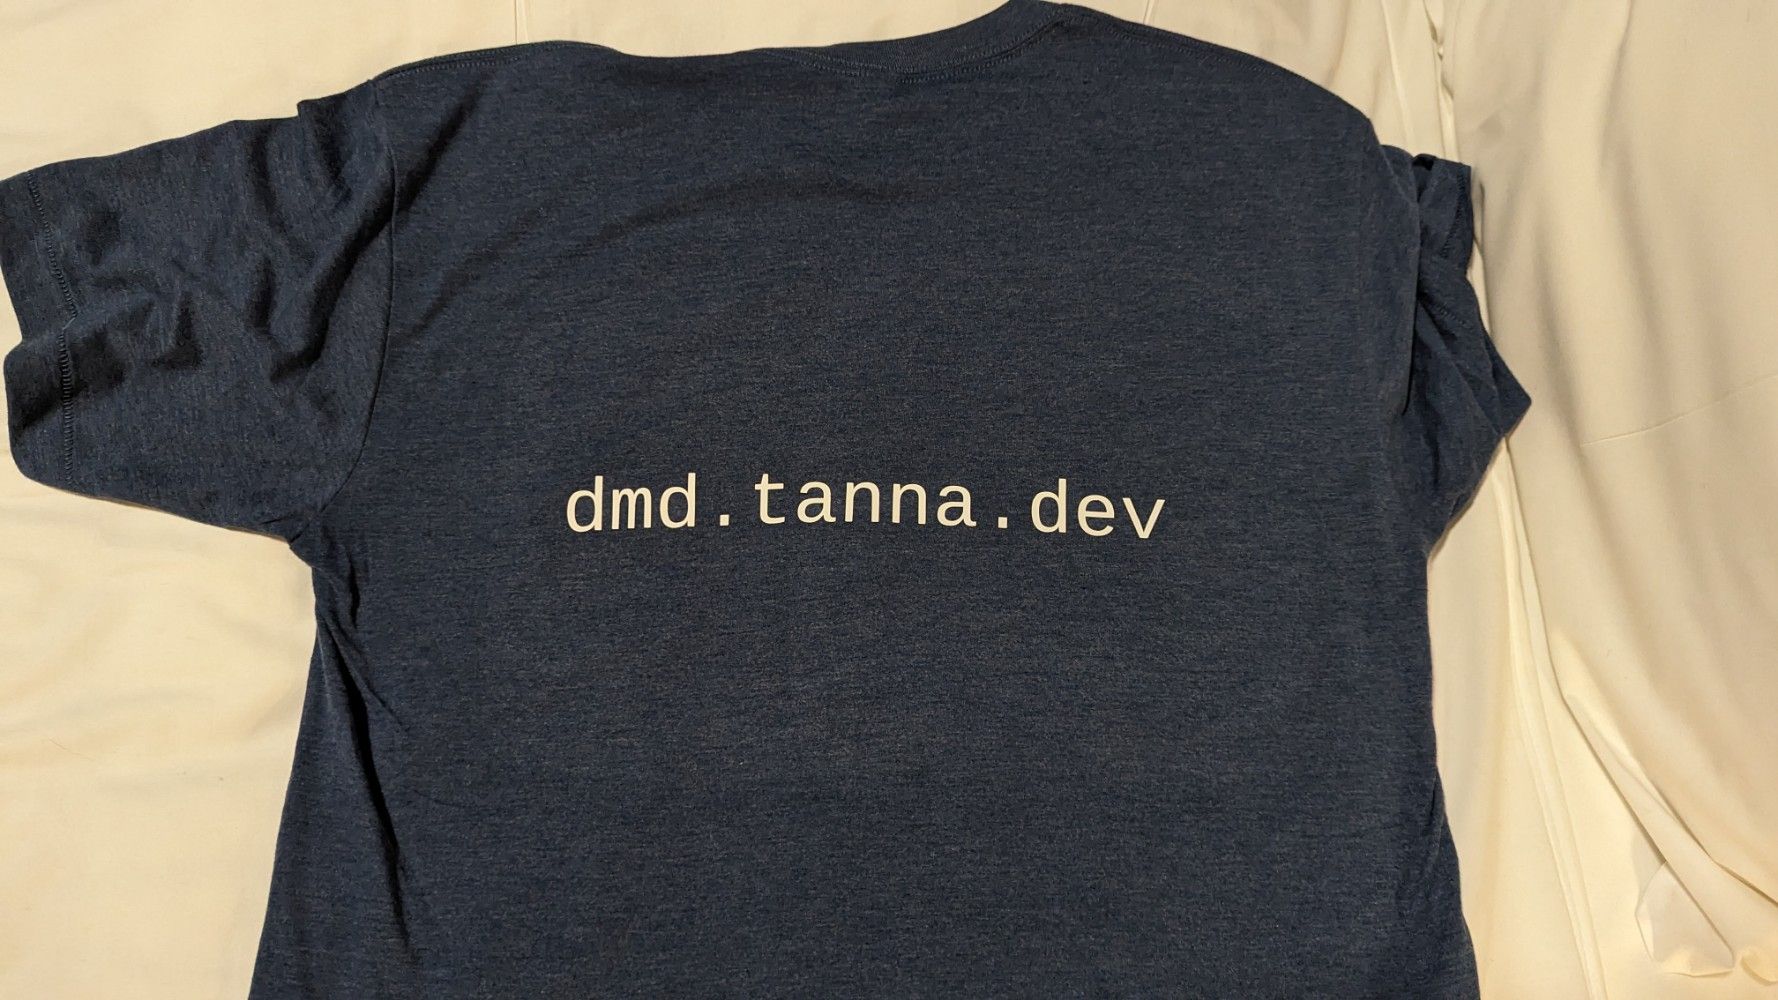 The back of a medium dark blue t-shirt, with the dependency-management-data website, dmd.tanna.dev, printed